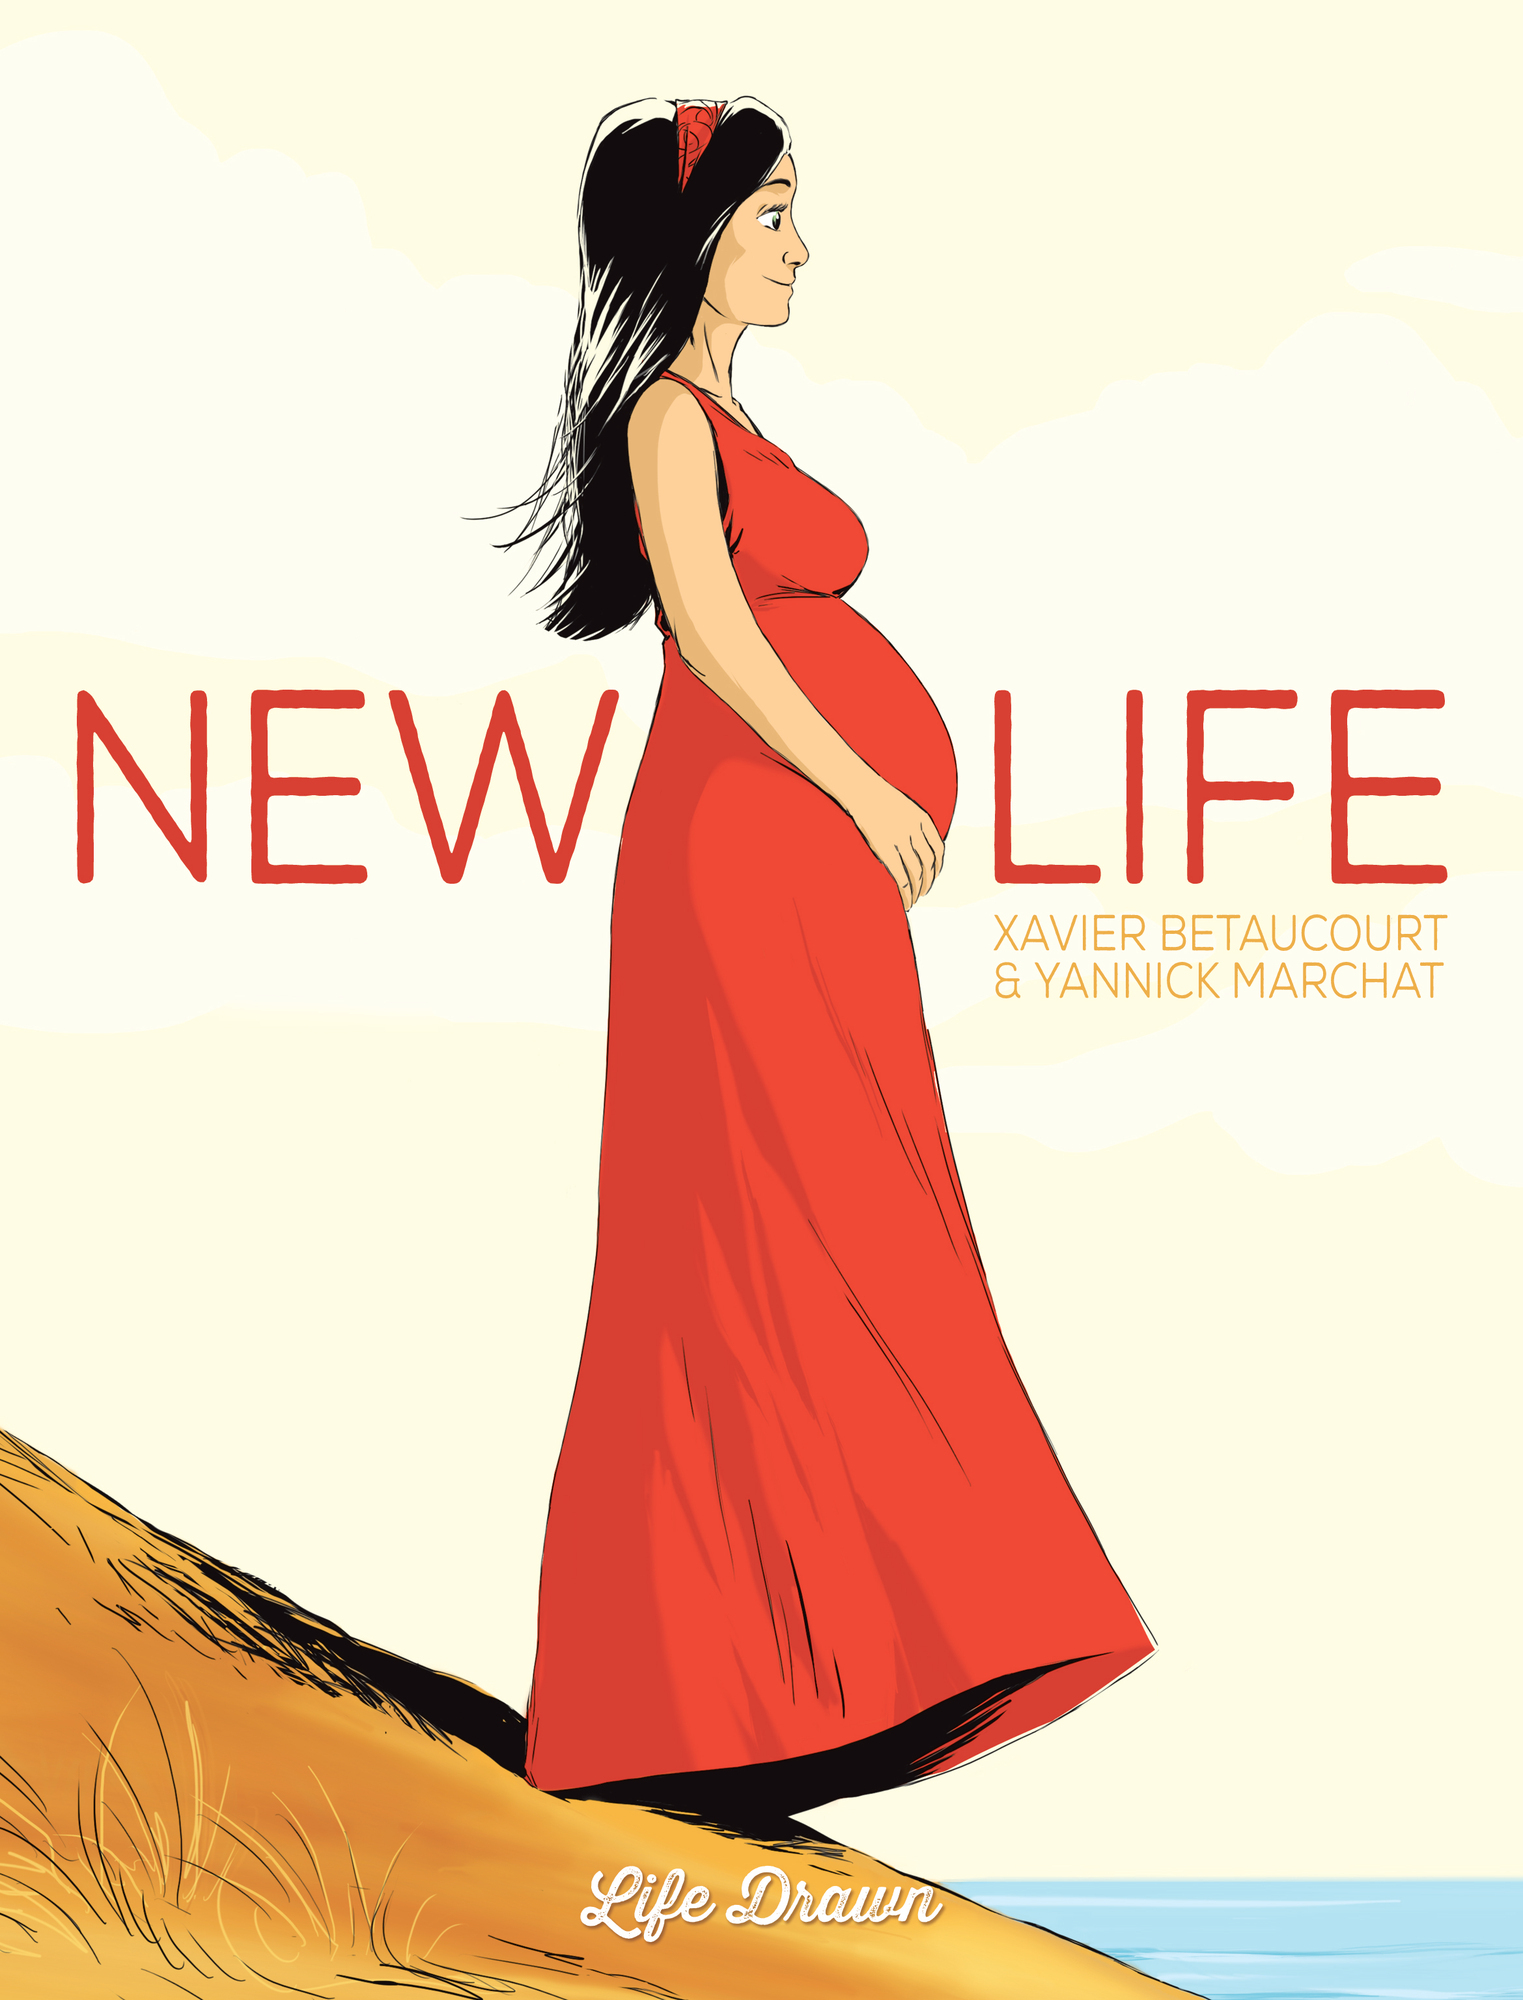 Review: New Life, by Xavier Betaucourt and Yannick Marchat